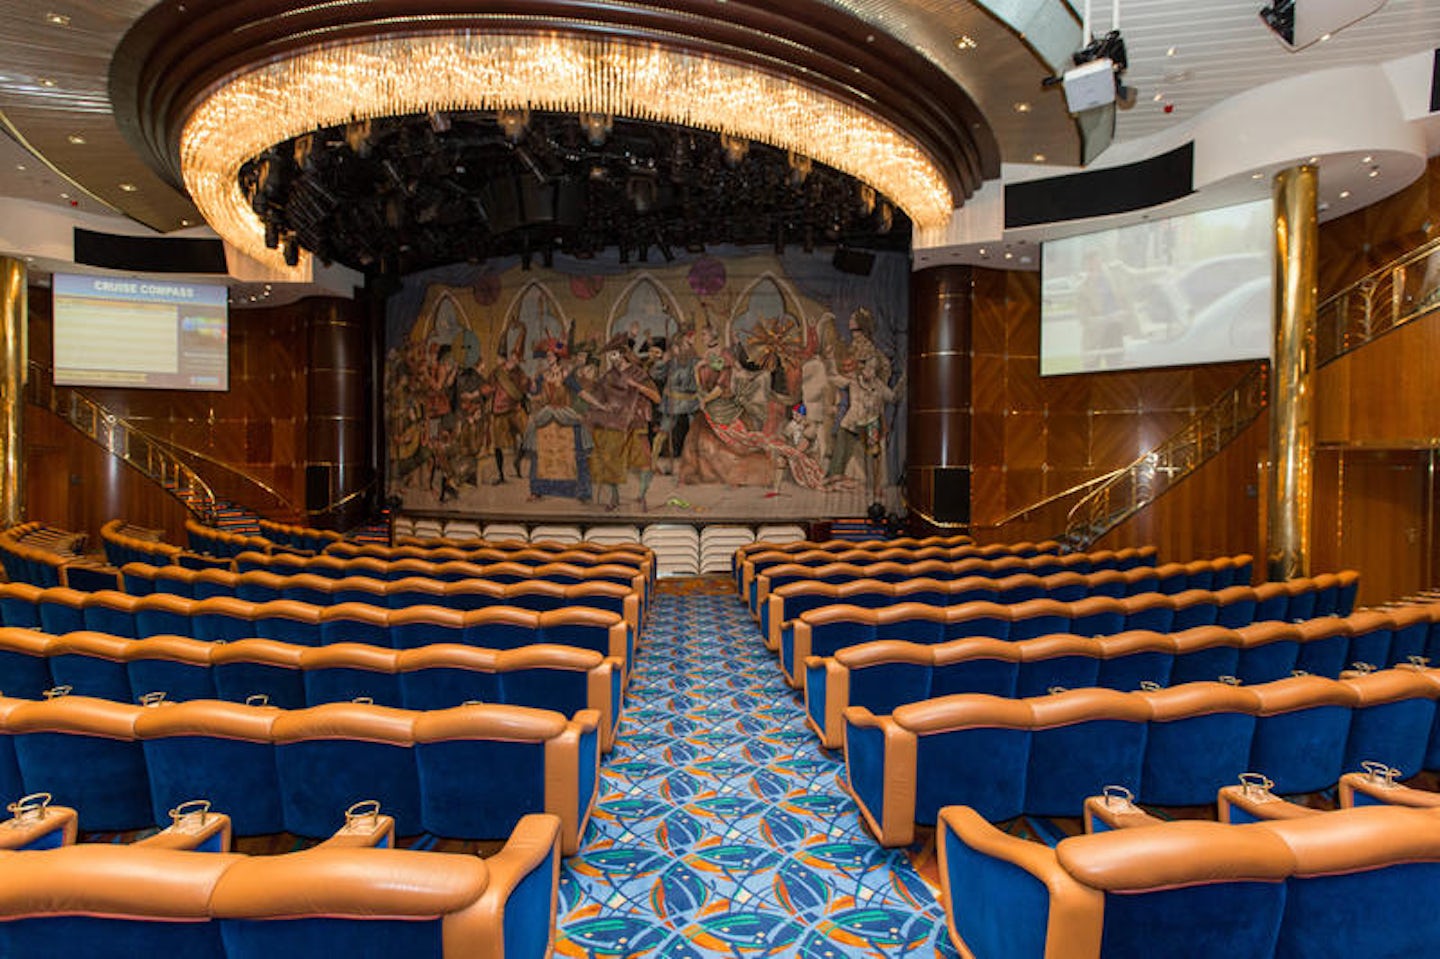 Masquerade Theater on Vision of the Seas